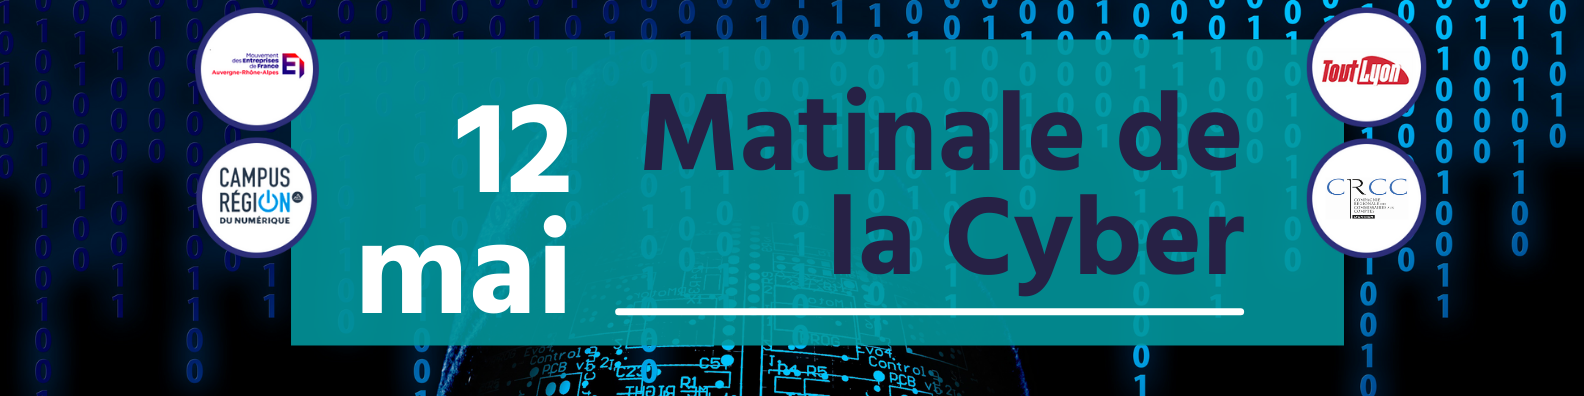 matinale cyber